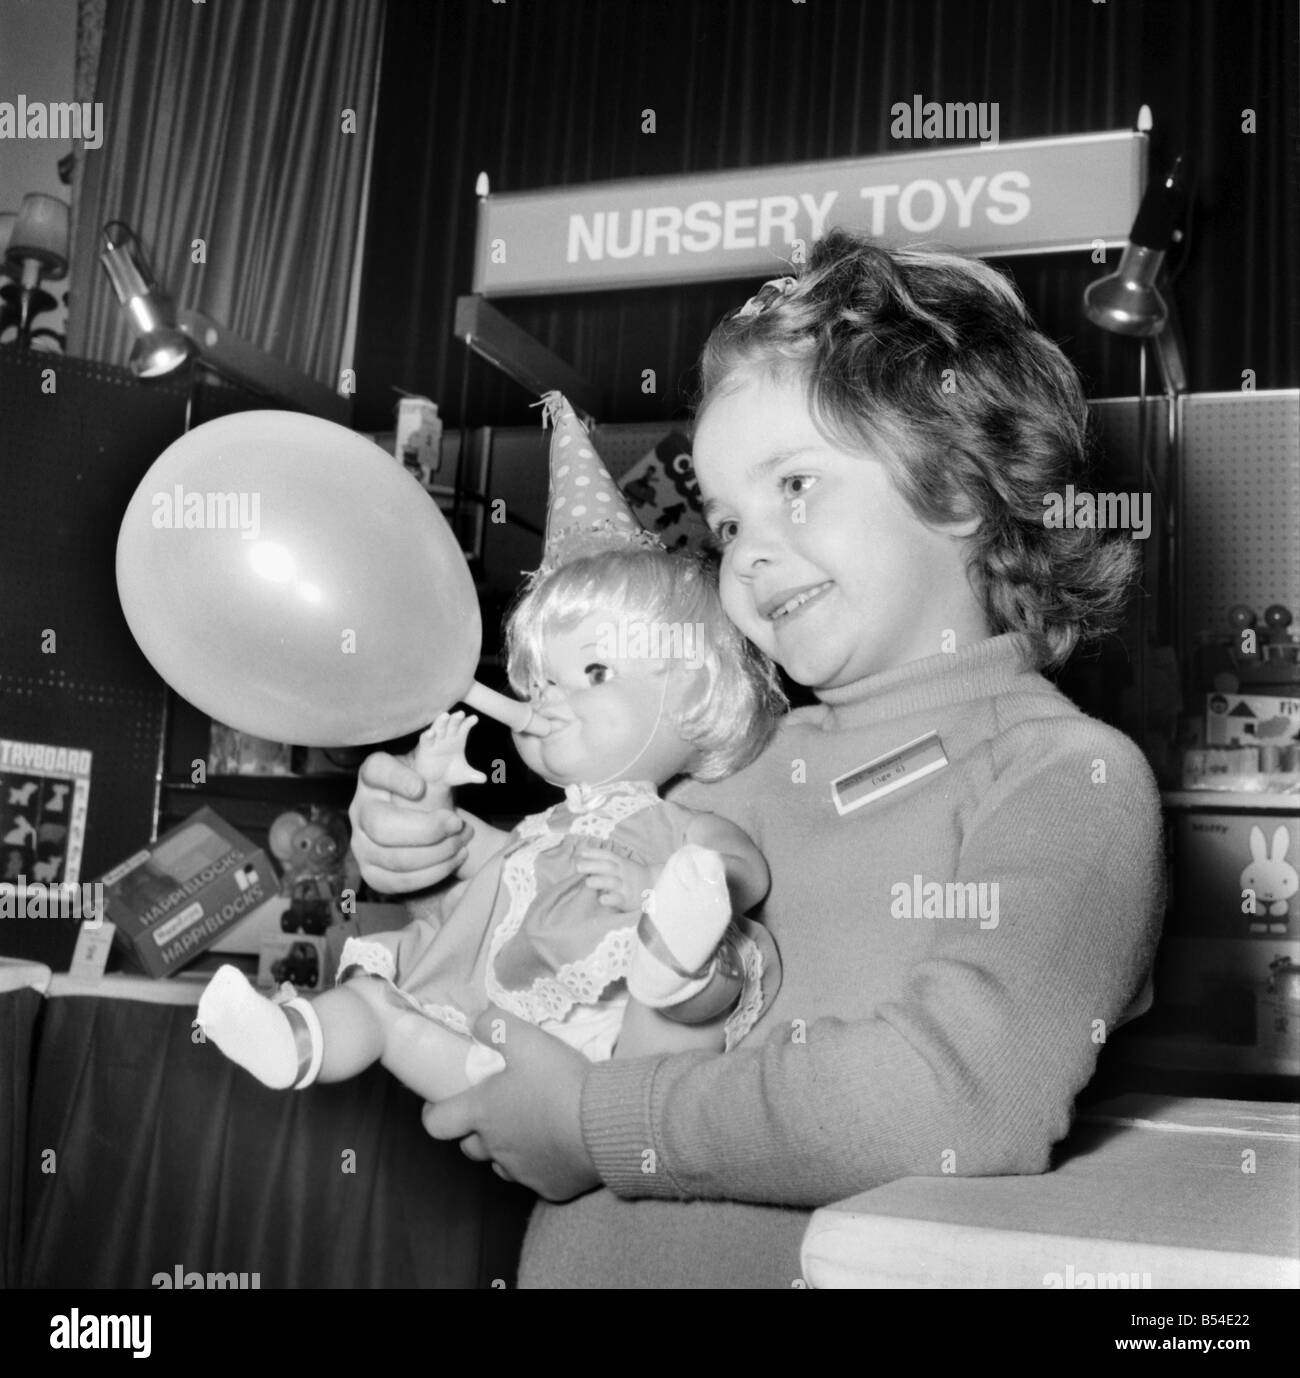 Children. Toys: The British Toy Manufacturers Association held a pre-Christmas display of new British Toys at the Waldorf Hotel, W.C.2. Holding the latest design in dolls - one which will blow up a balloon when its arms are moved is 6 year old Gail McIlroy of Wallington, Surrey. November 1969 Z10631-003 Stock Photo